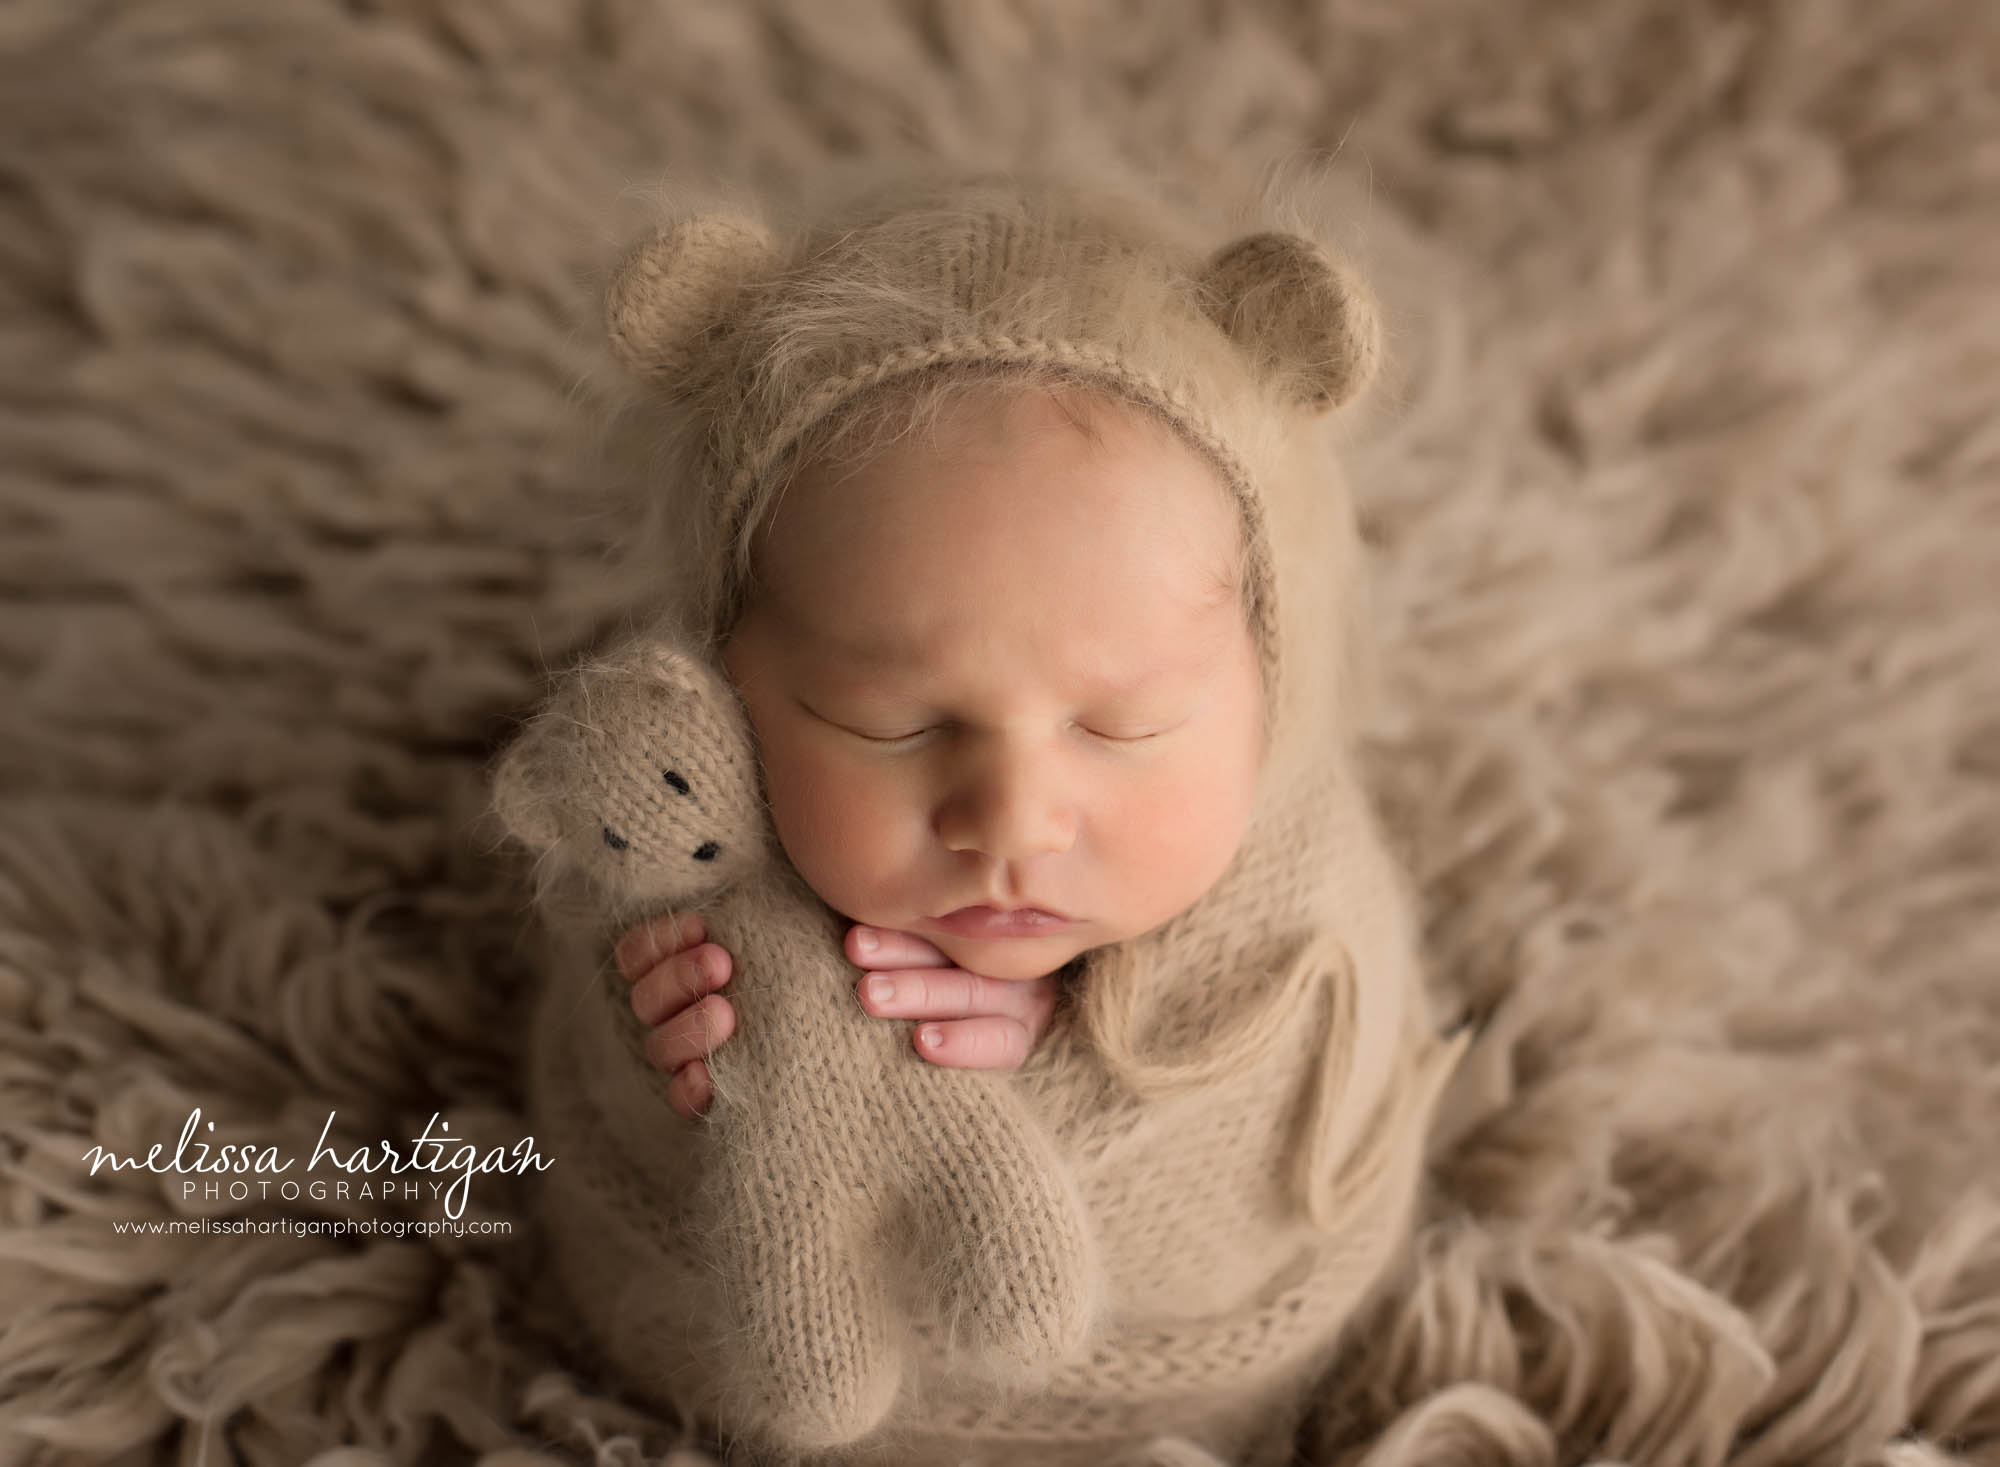 Newborn baby boy wrapped in caramel colored knitted werap with matching knitted bear bonnet and teddy bear